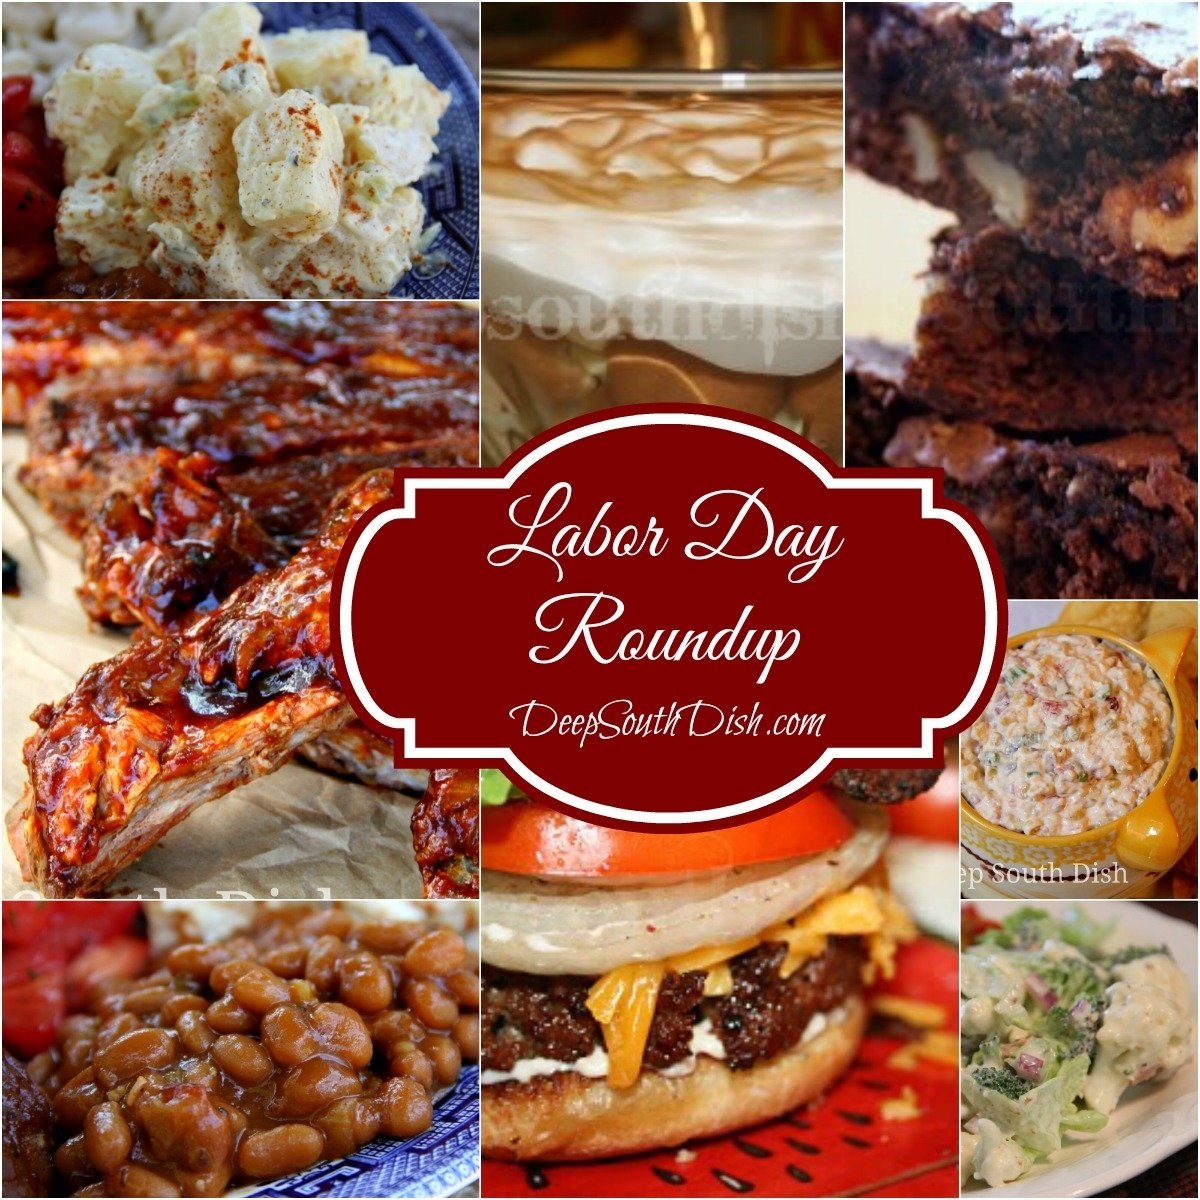 10 Pretty Ideas For Labor Day Weekend deep south dish labor day recipe roundup dips burgers ribs 2022